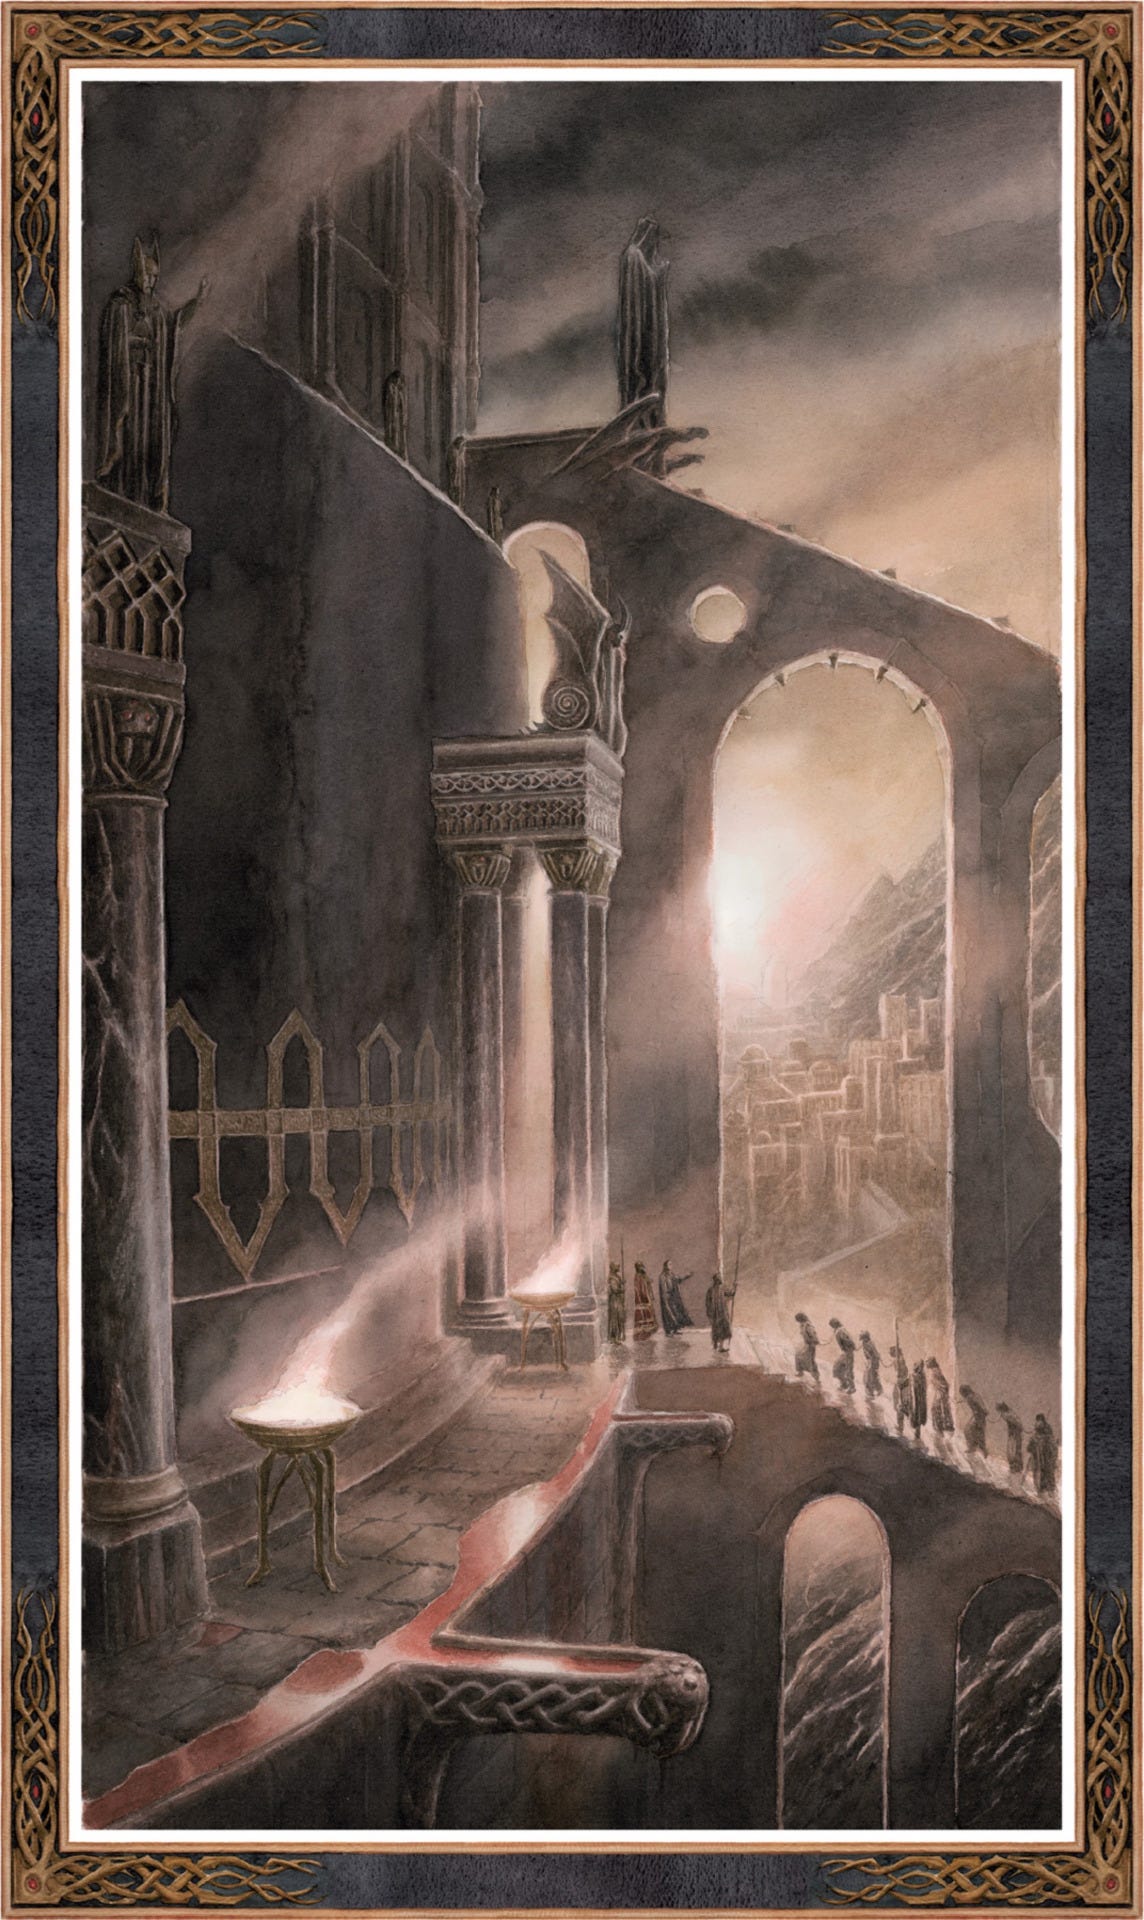 The Temple of Sauron, by Alan Lee. From The Fall of Númenor: And Other Tales from the Second Age of Middle-Earth, by J.R.R. Tolkien.